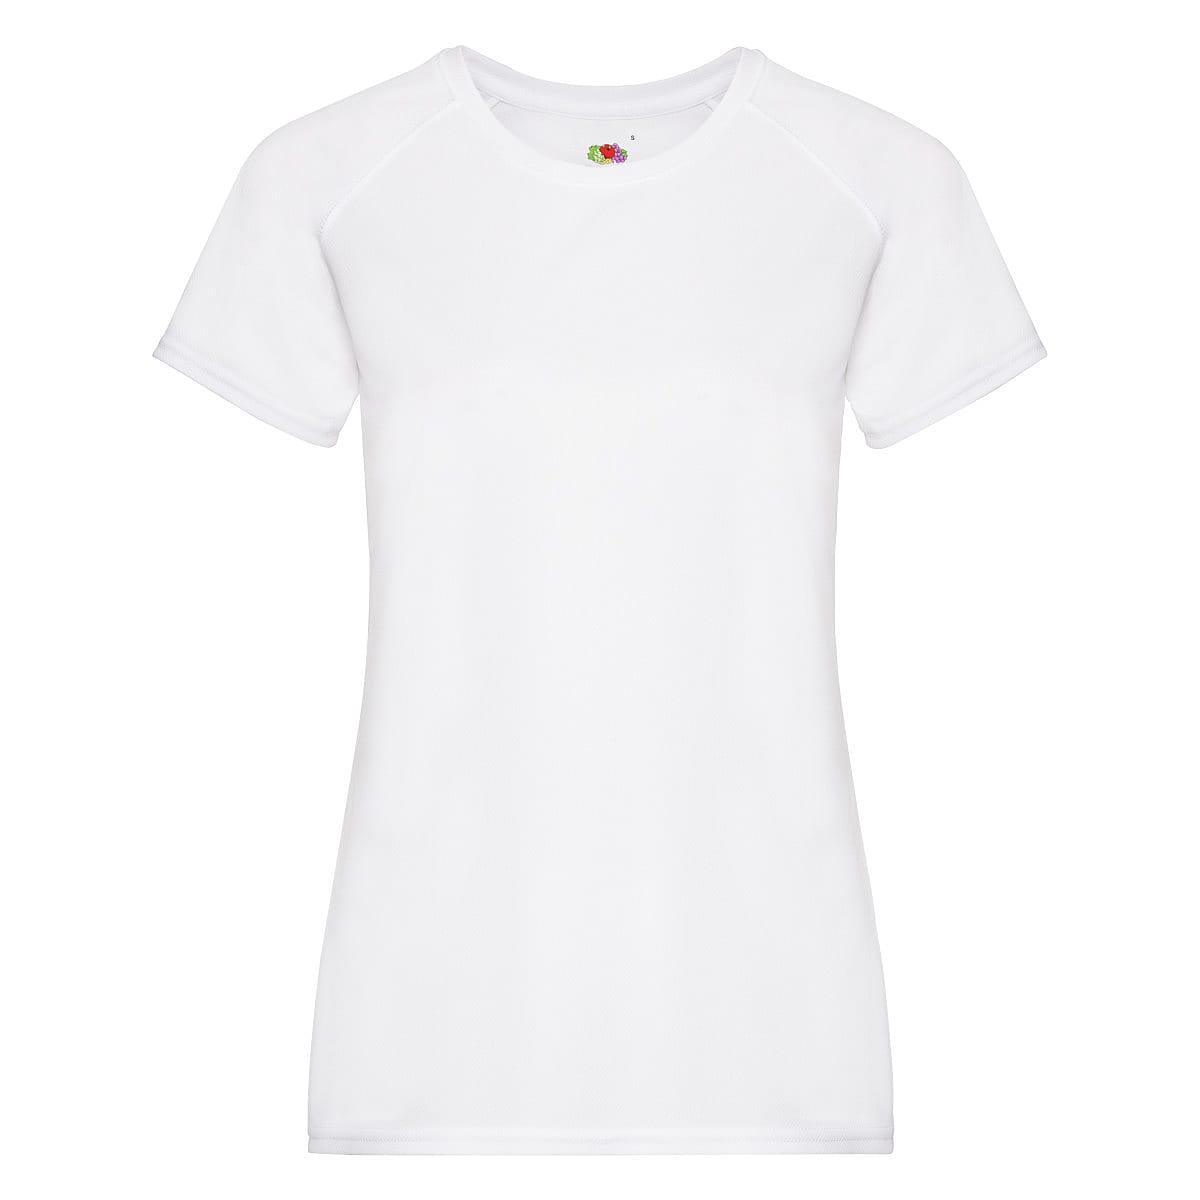 Fruit Of The Loom Womens Performance T-Shirt in White (Product Code: 61392)